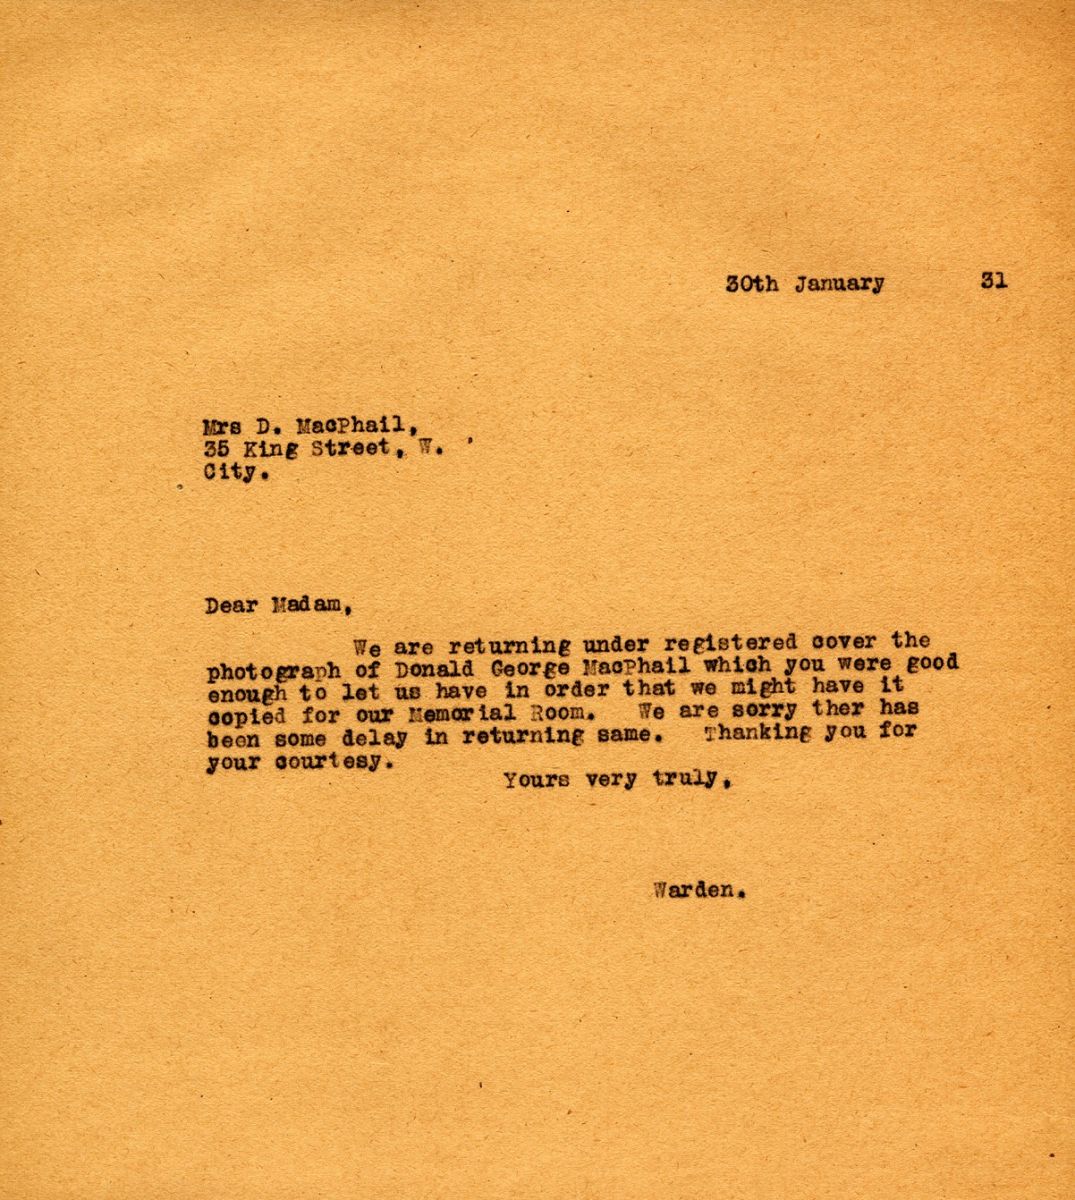 Letter from the Warden to Mrs. D. MacPhail, 30th January 1931